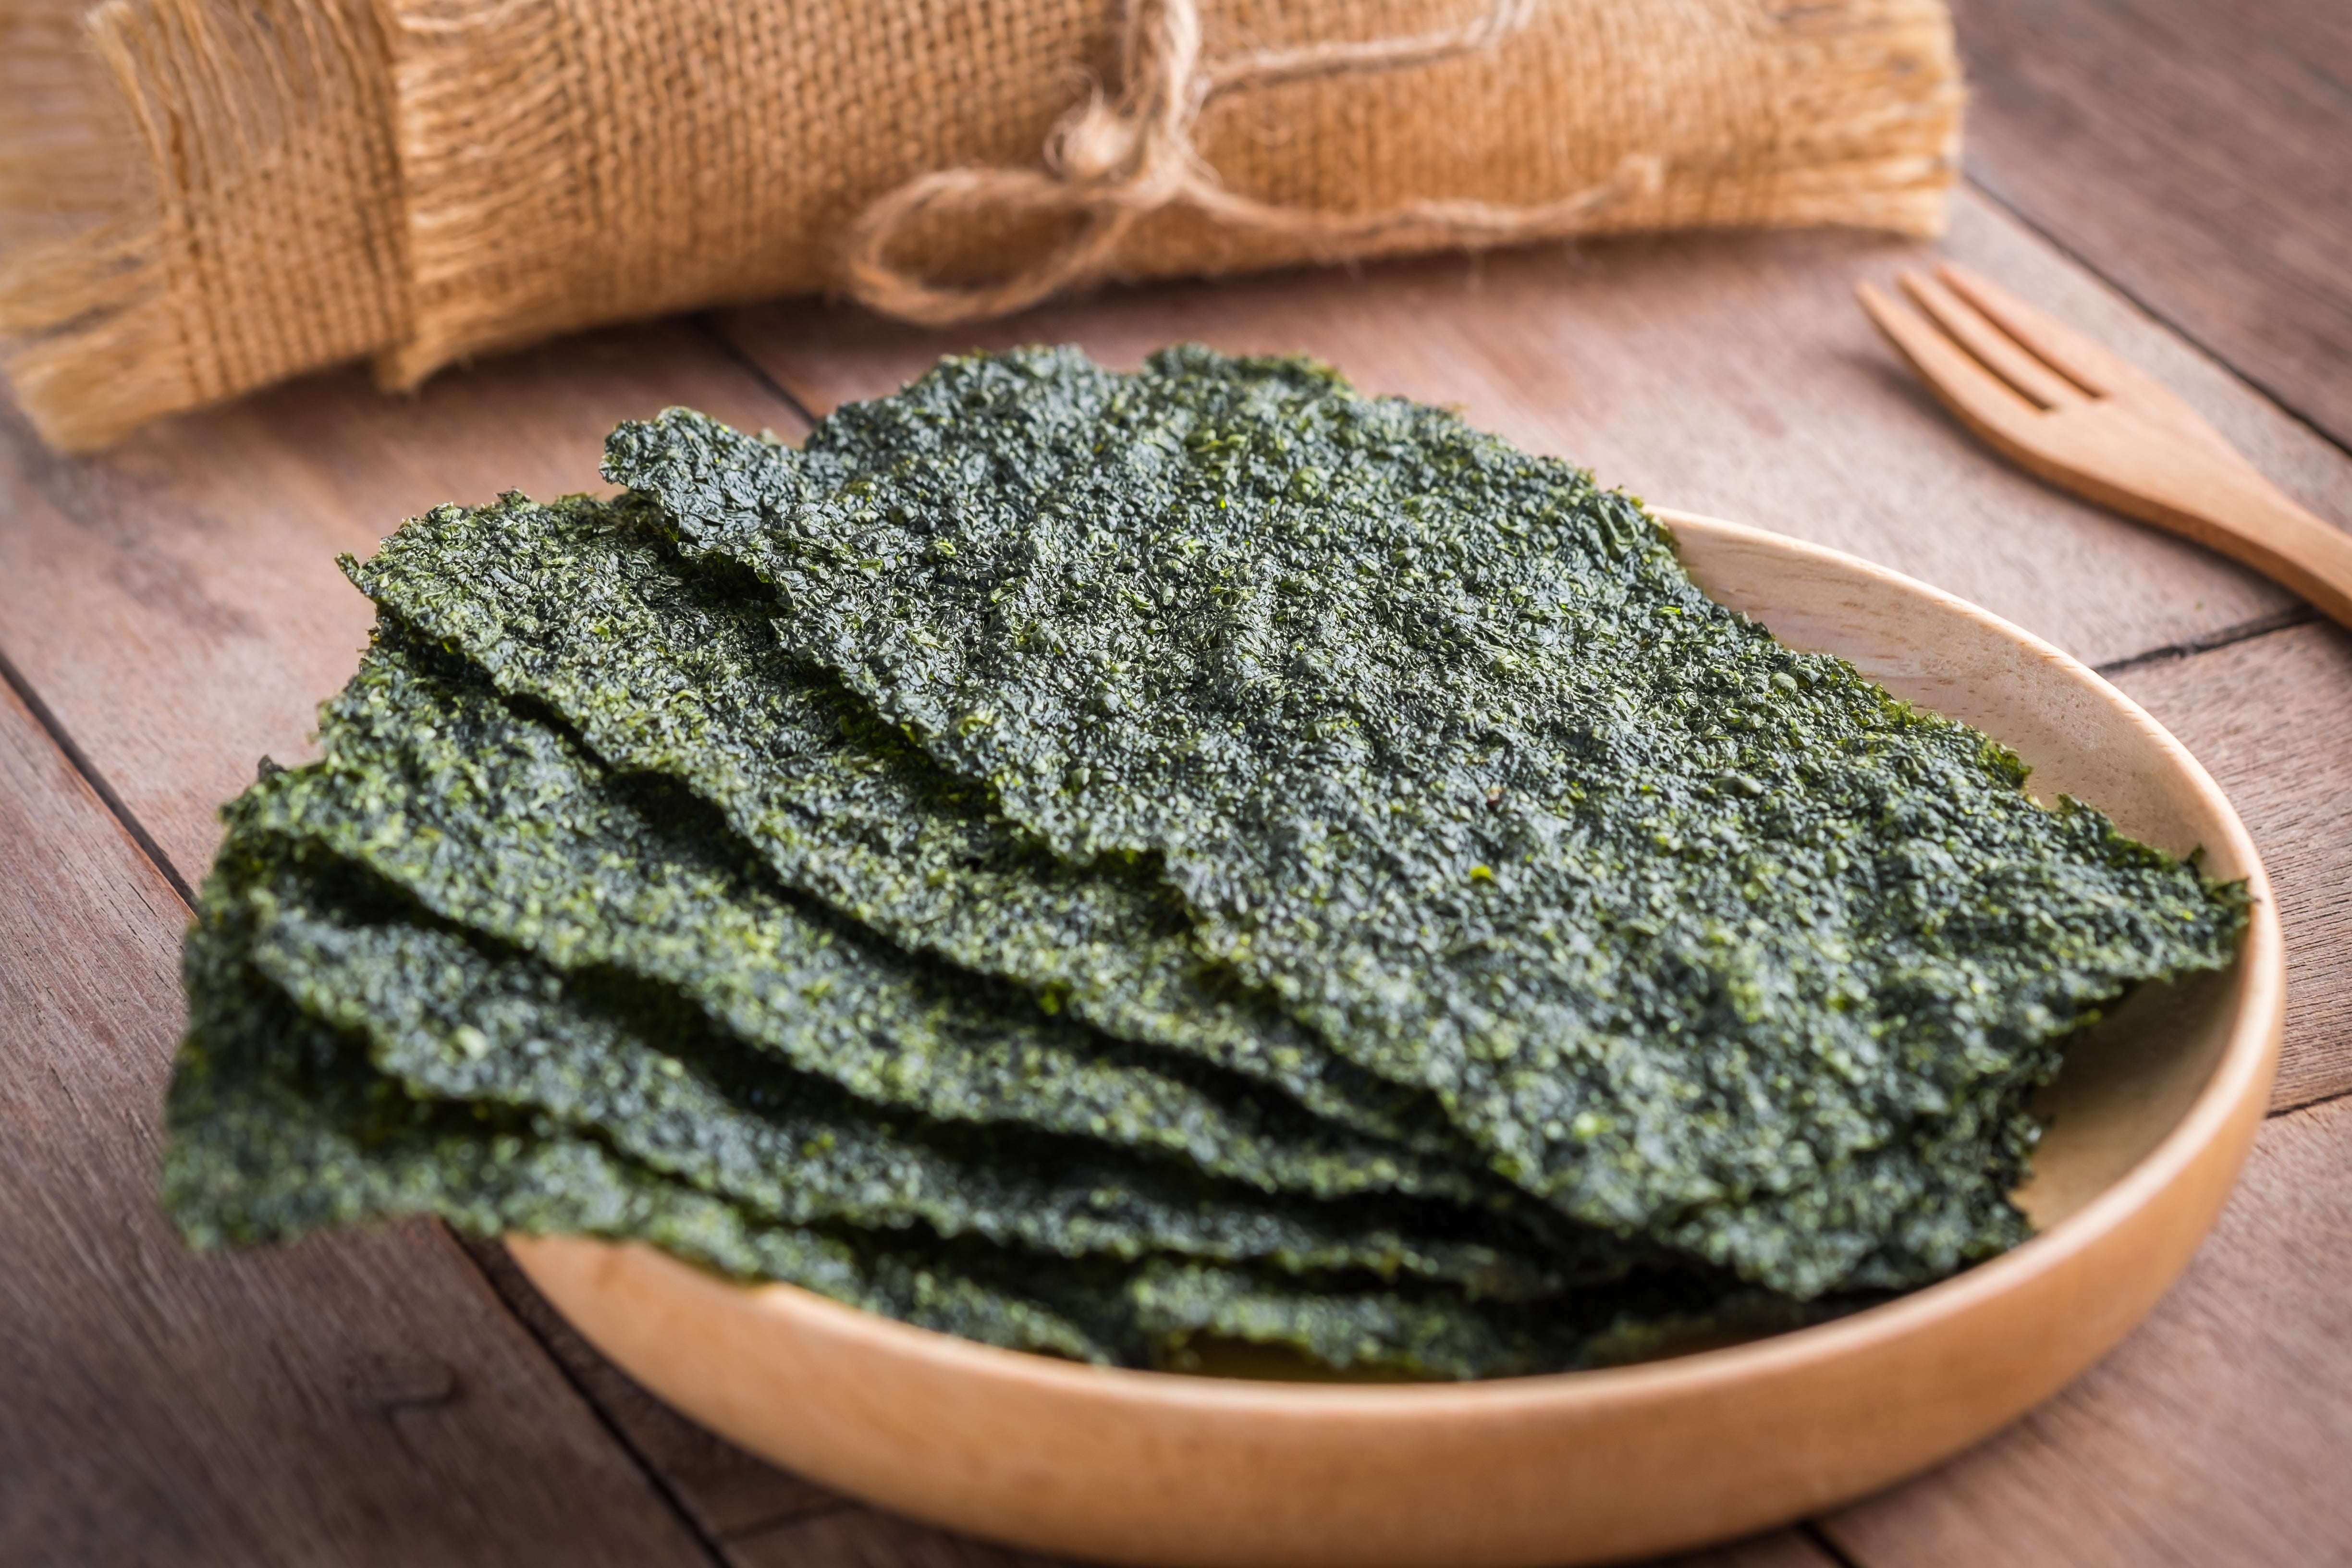 Nori has a crunchy umami flavour and can be added to soups and stir-fries or in place of slat